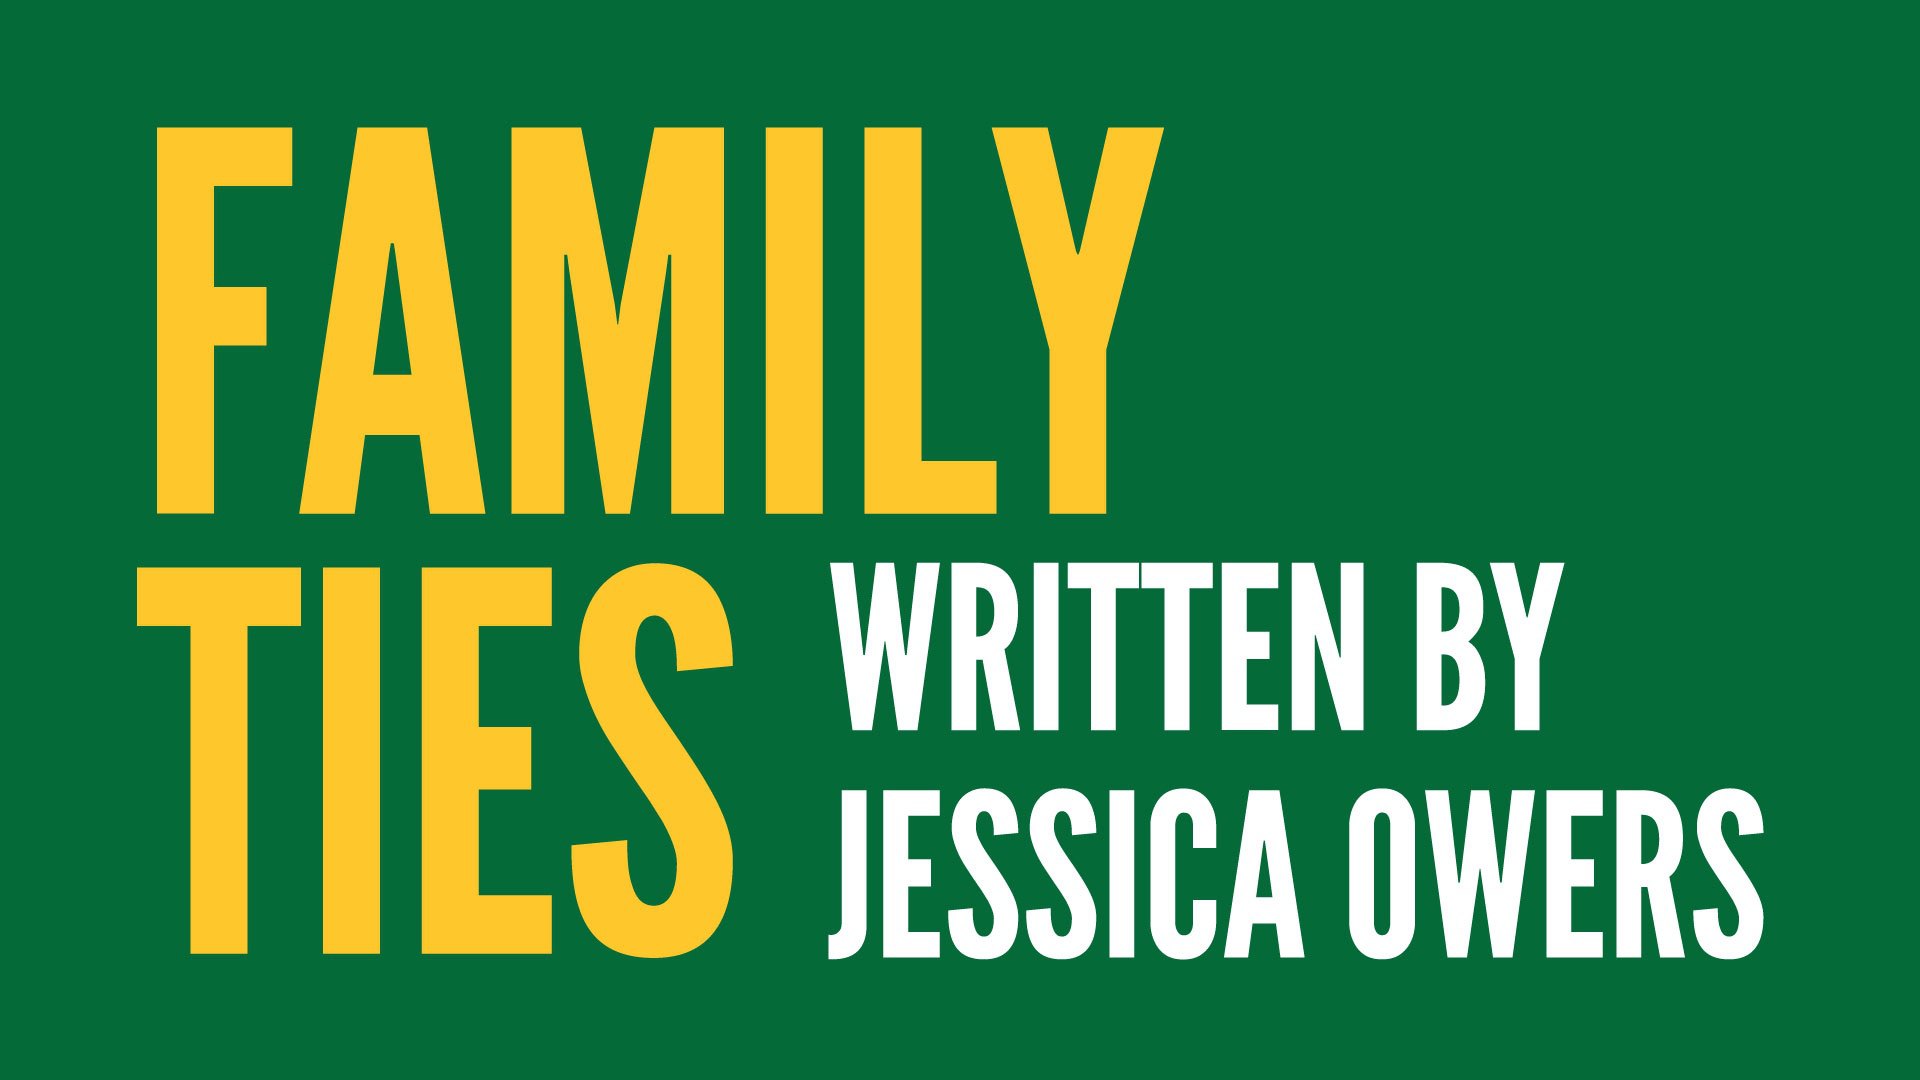 Family Ties Written by Jessica Owers